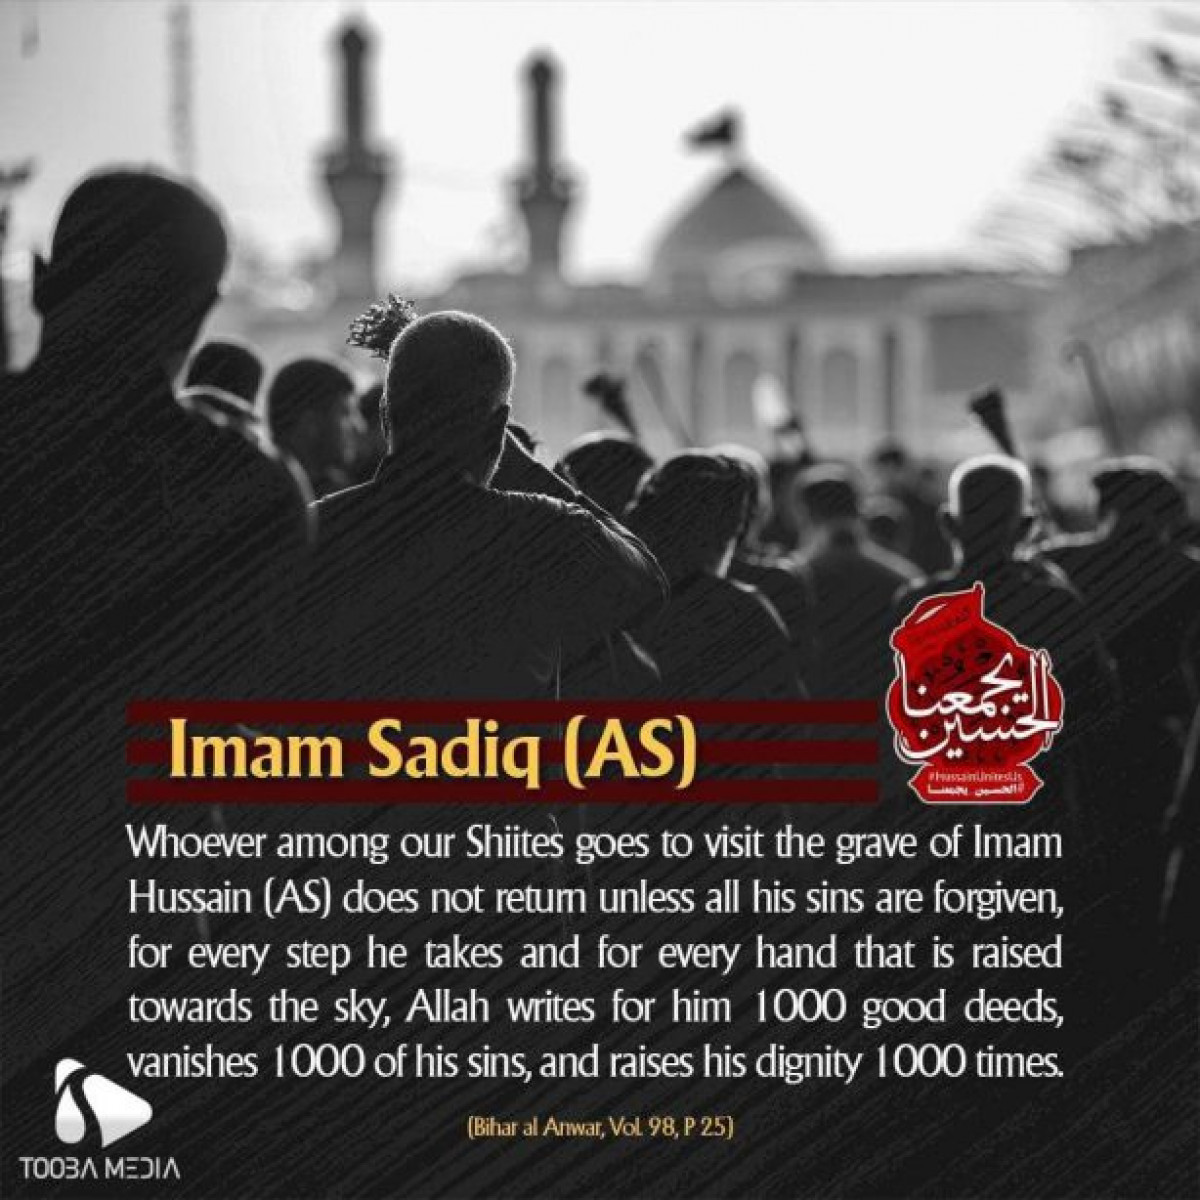 Whoever among our Shiites goes to visit the grave of Imam Hussain (A.S) does not return unless all his sins are forgiven…